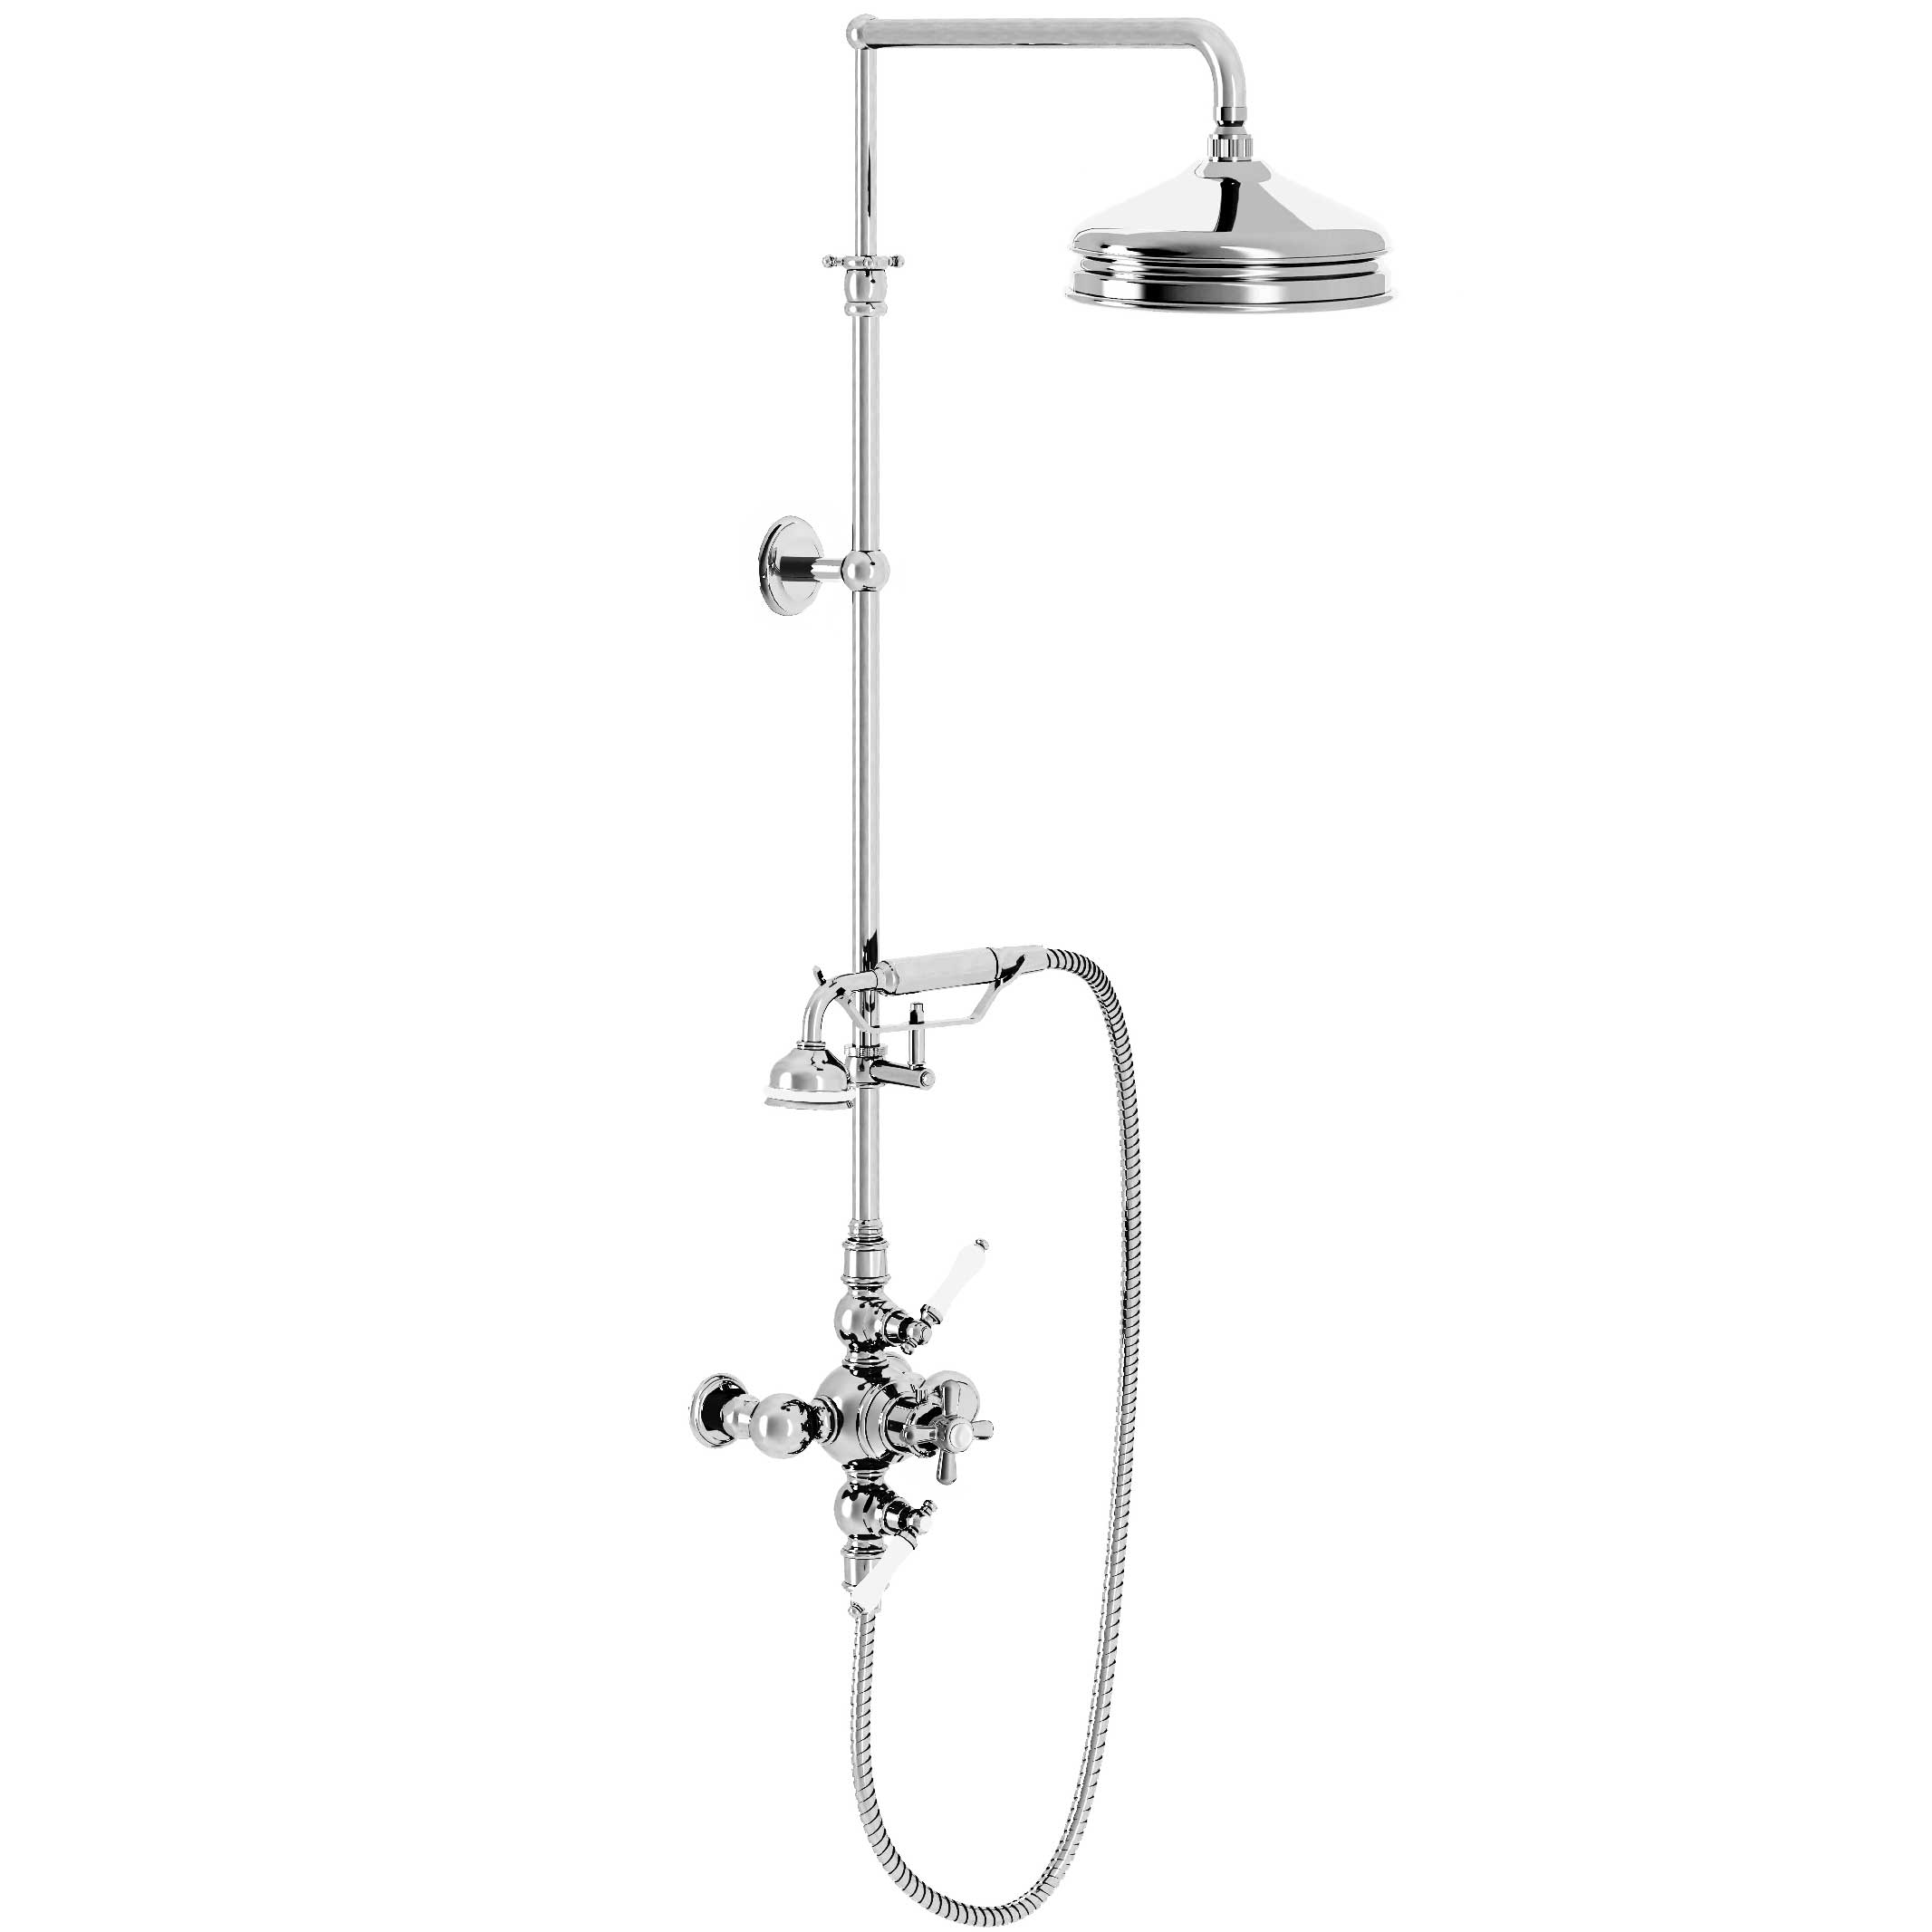 M40-2204T Thermo. shower mixer with column, anti-scaling